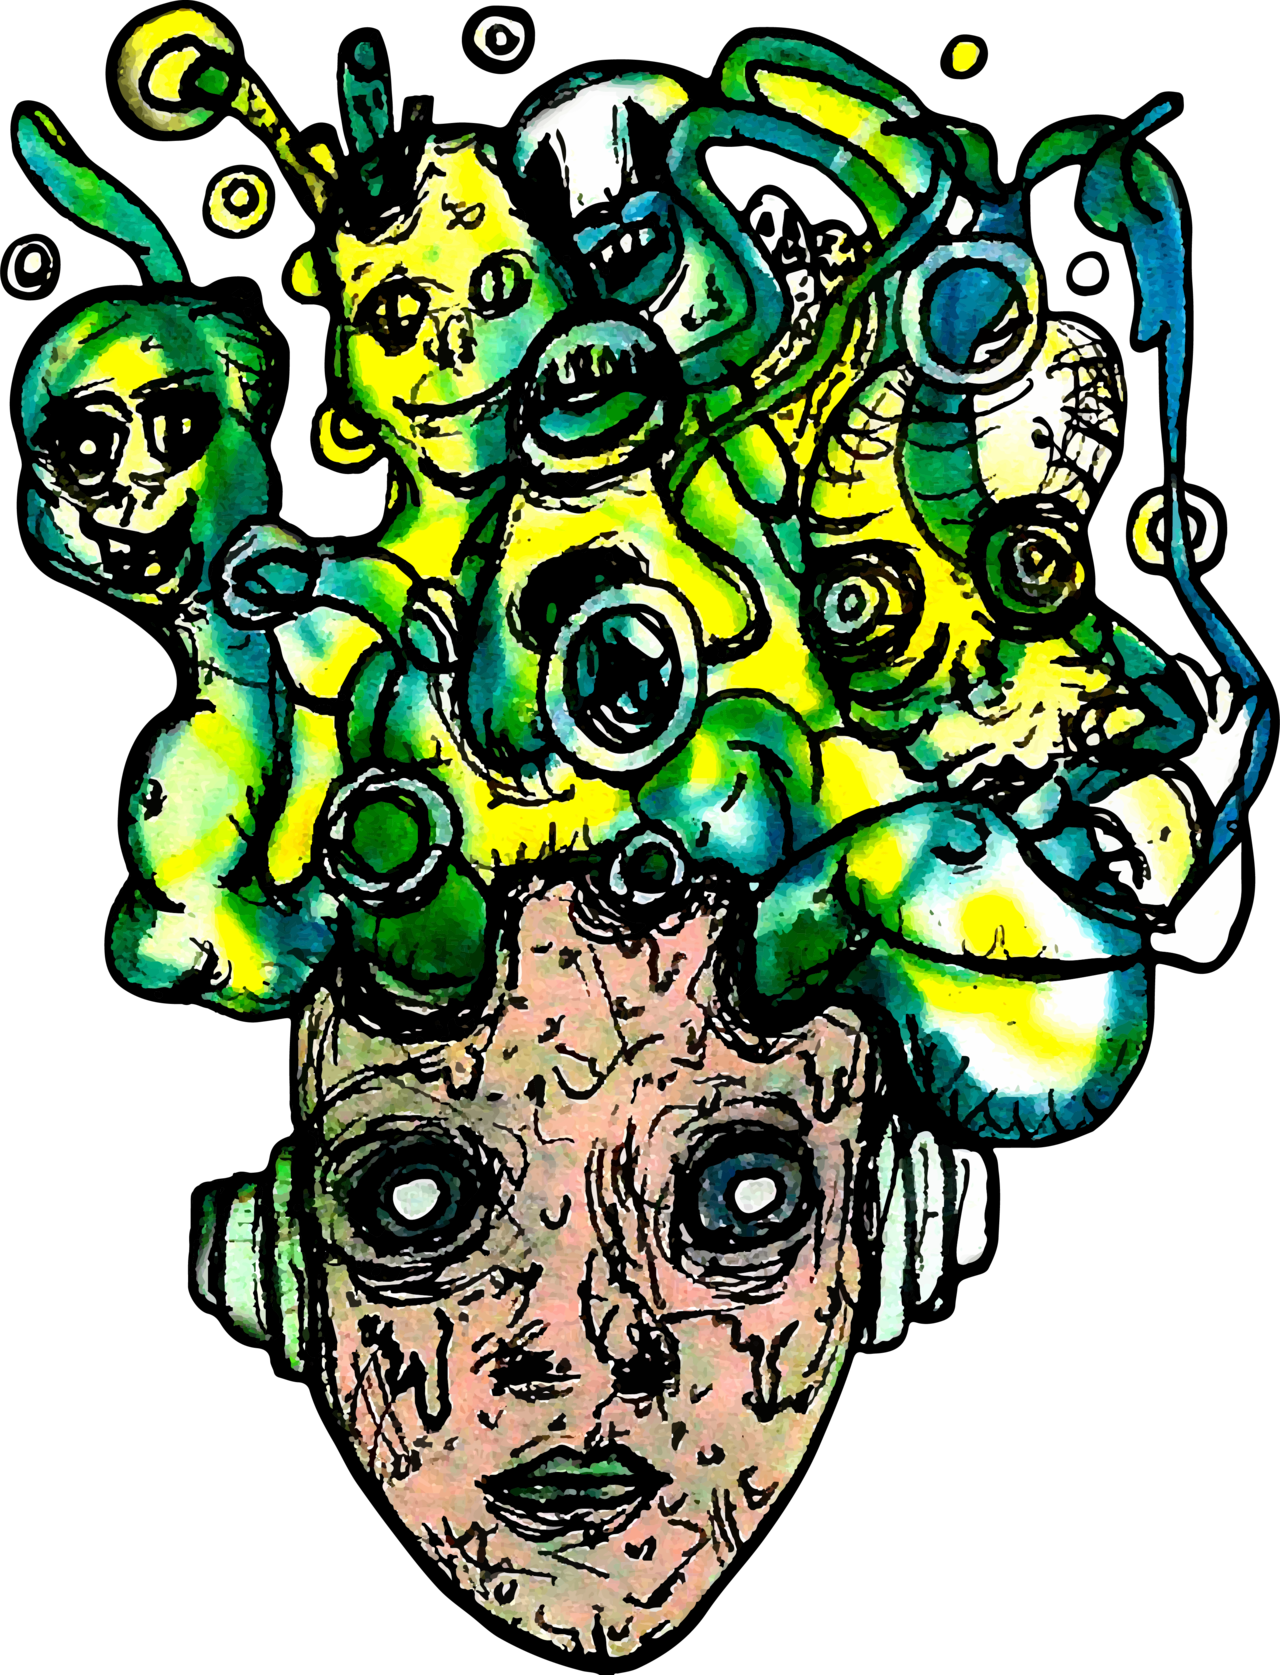 Psychedelic Trippy Art Tumblr Creepy Png Psychedelic - Psychedelic Trippy Art Tumblr Creepy Png Psychedelic (1280x1675)